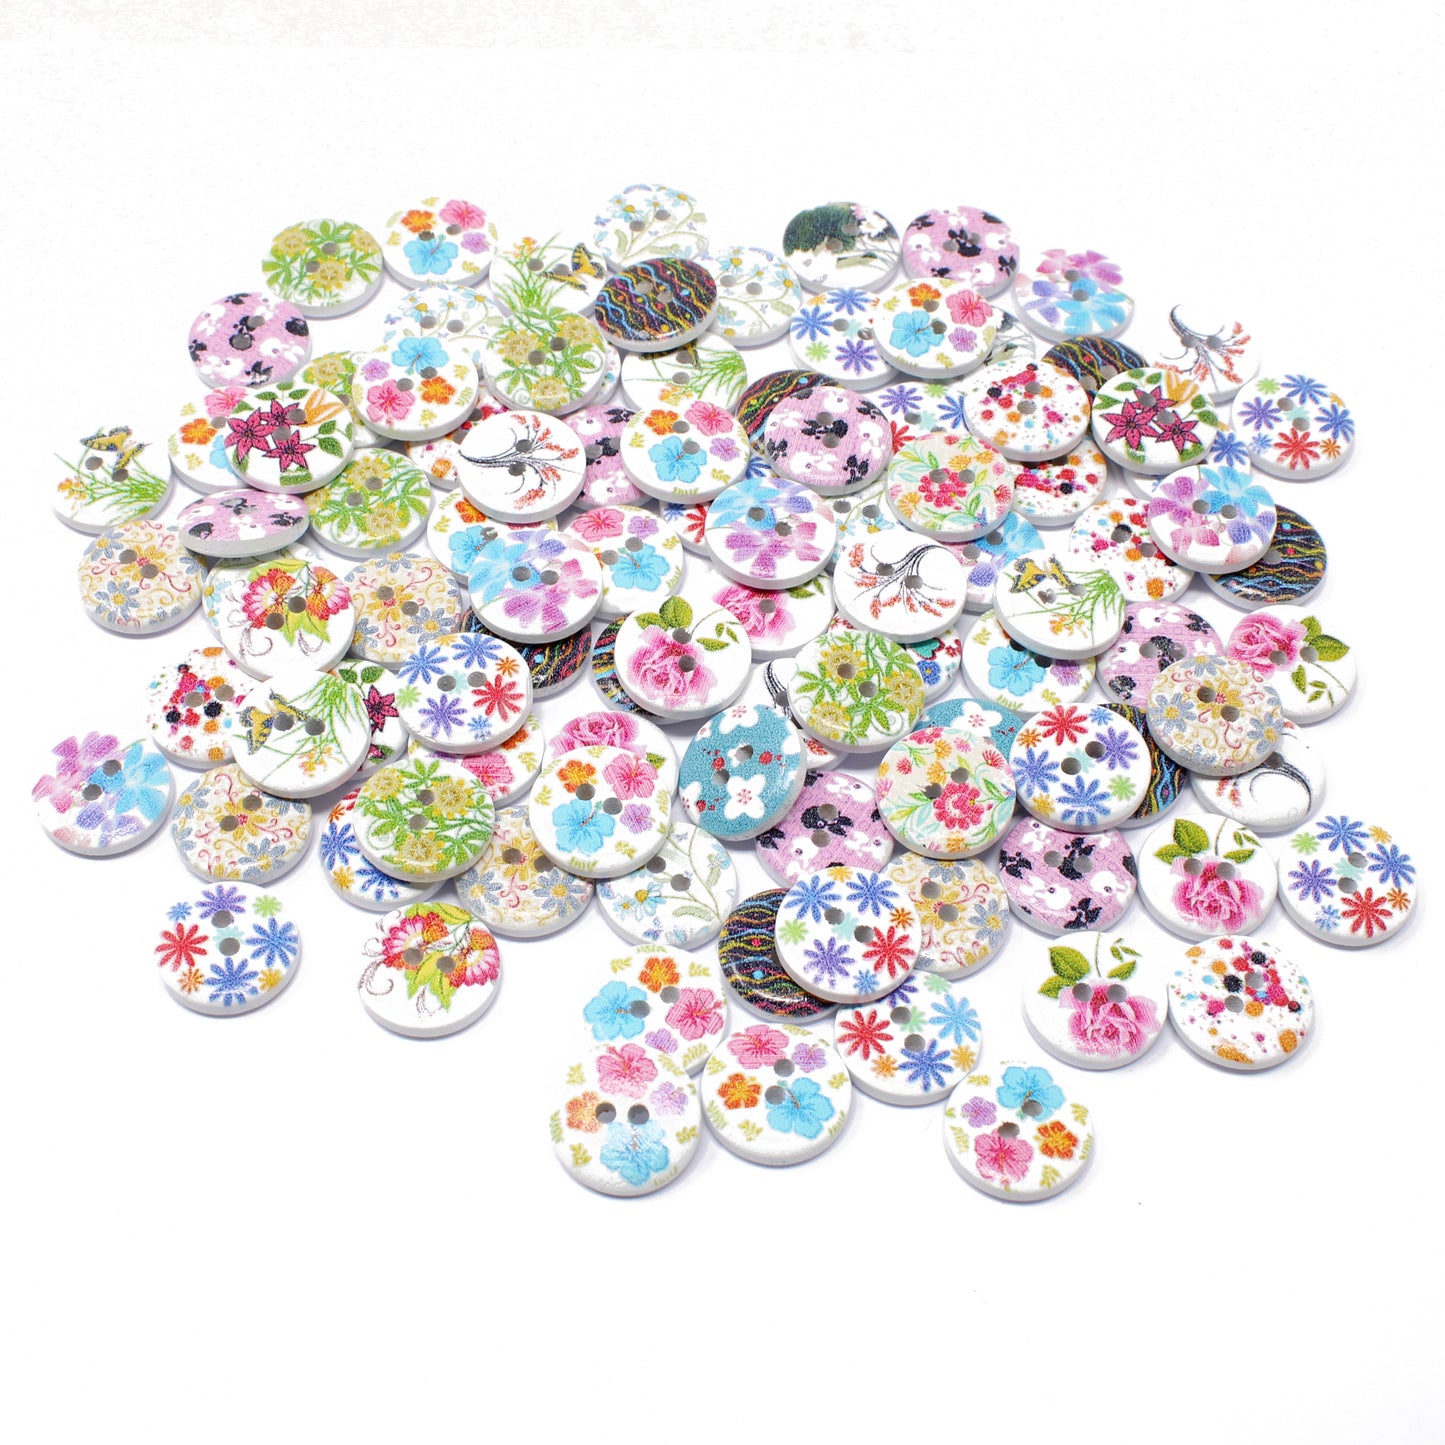 Floral Mix 100 Mixed 15mm Round Wooden Craft Buttons